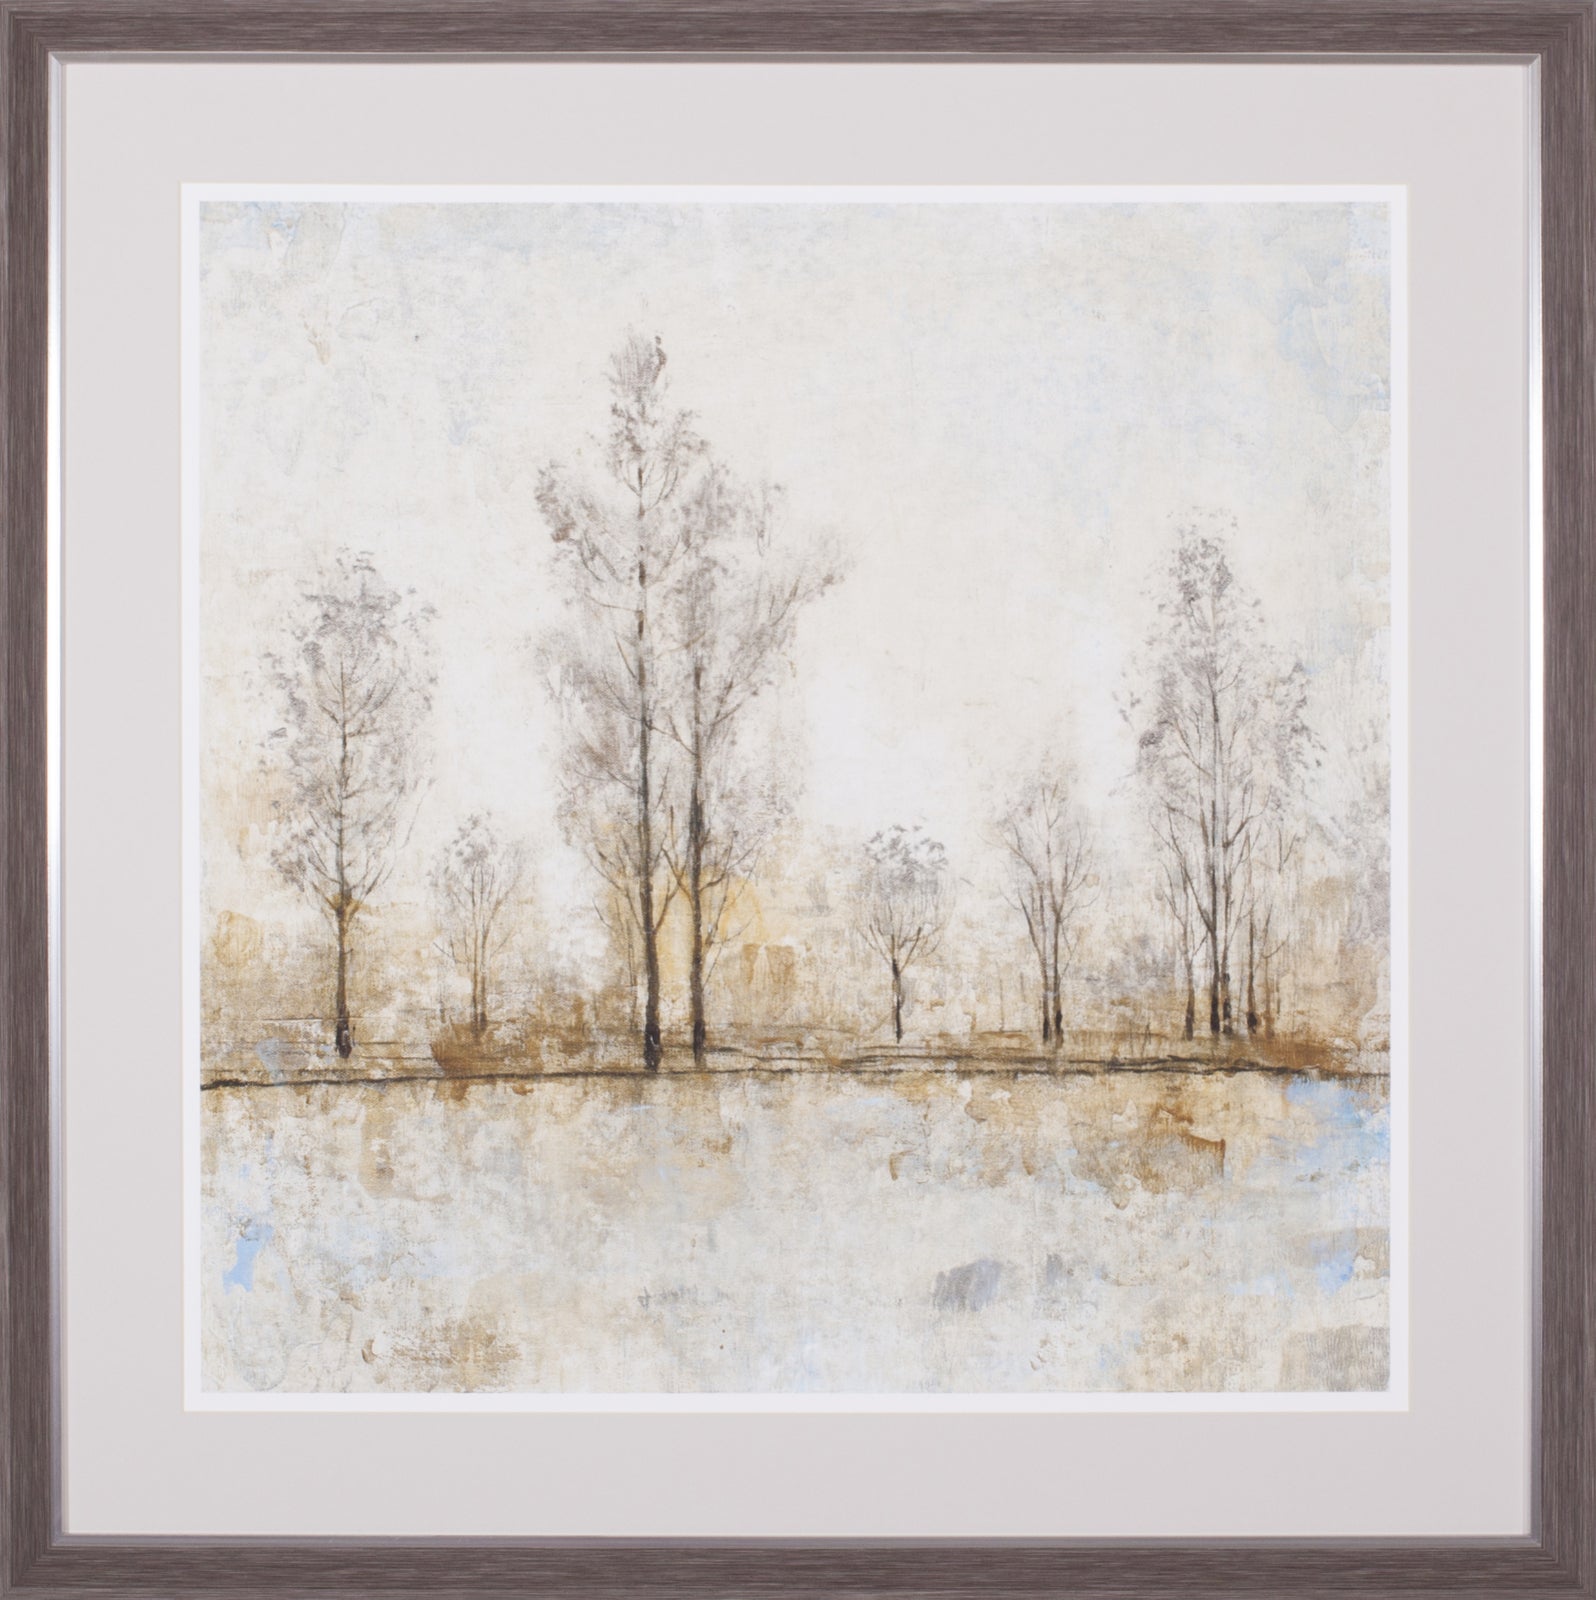 Art Effects Quiet Nature IV Wall Art by Tim O'Toole